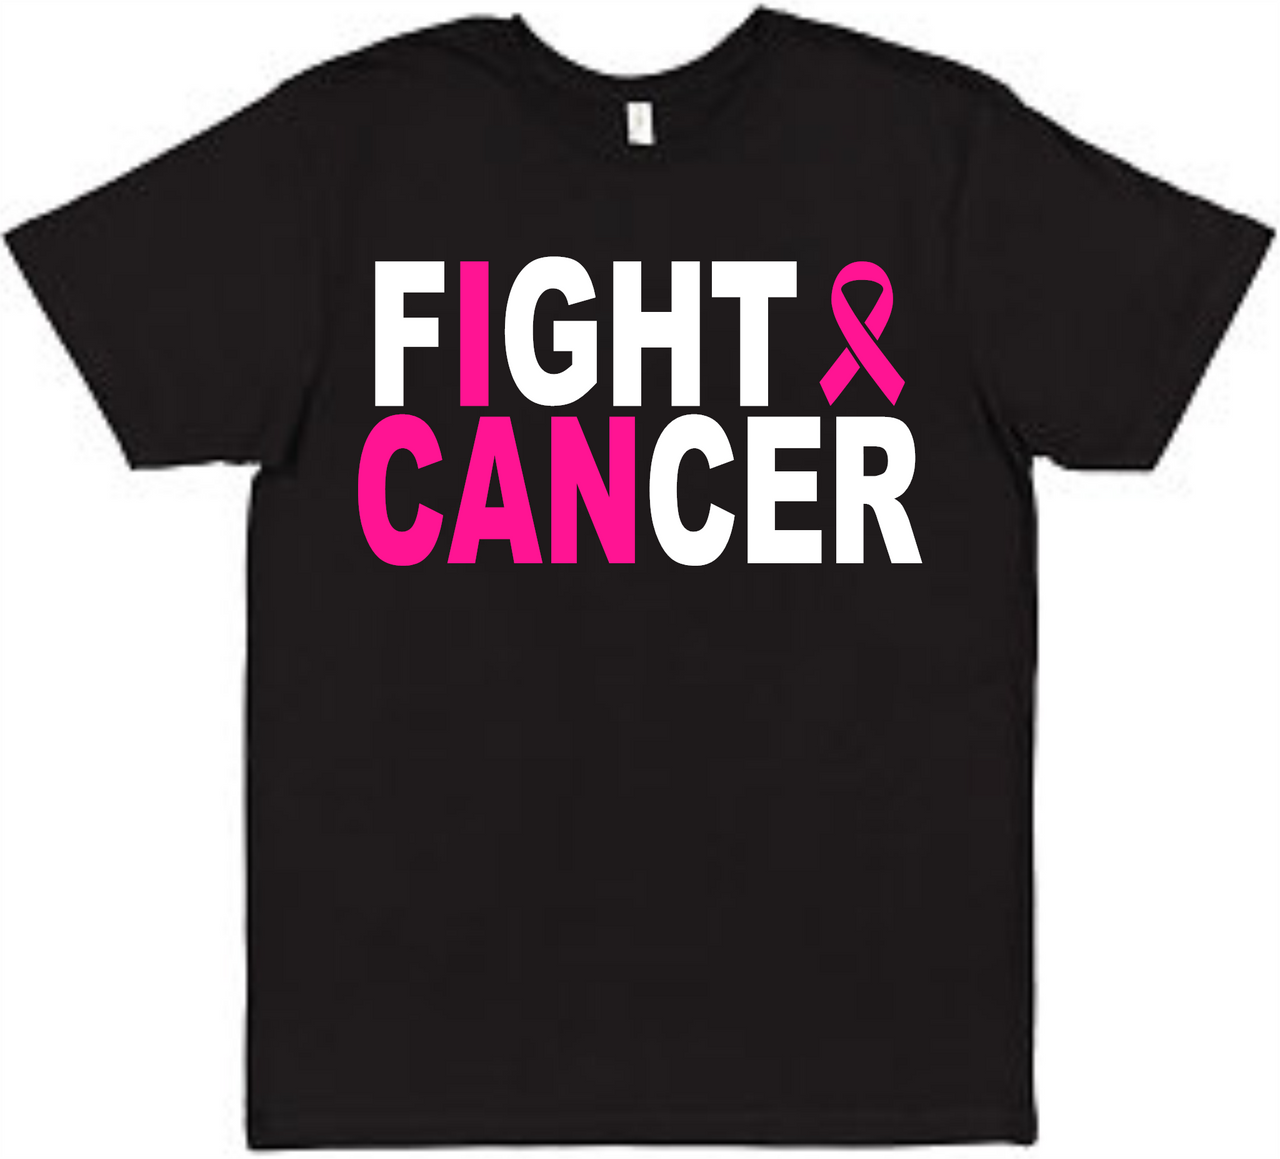 I Can Fight Cancer Tee Adult Shirt by Akron Pride Custom Tees | Akron Pride Custom Tees